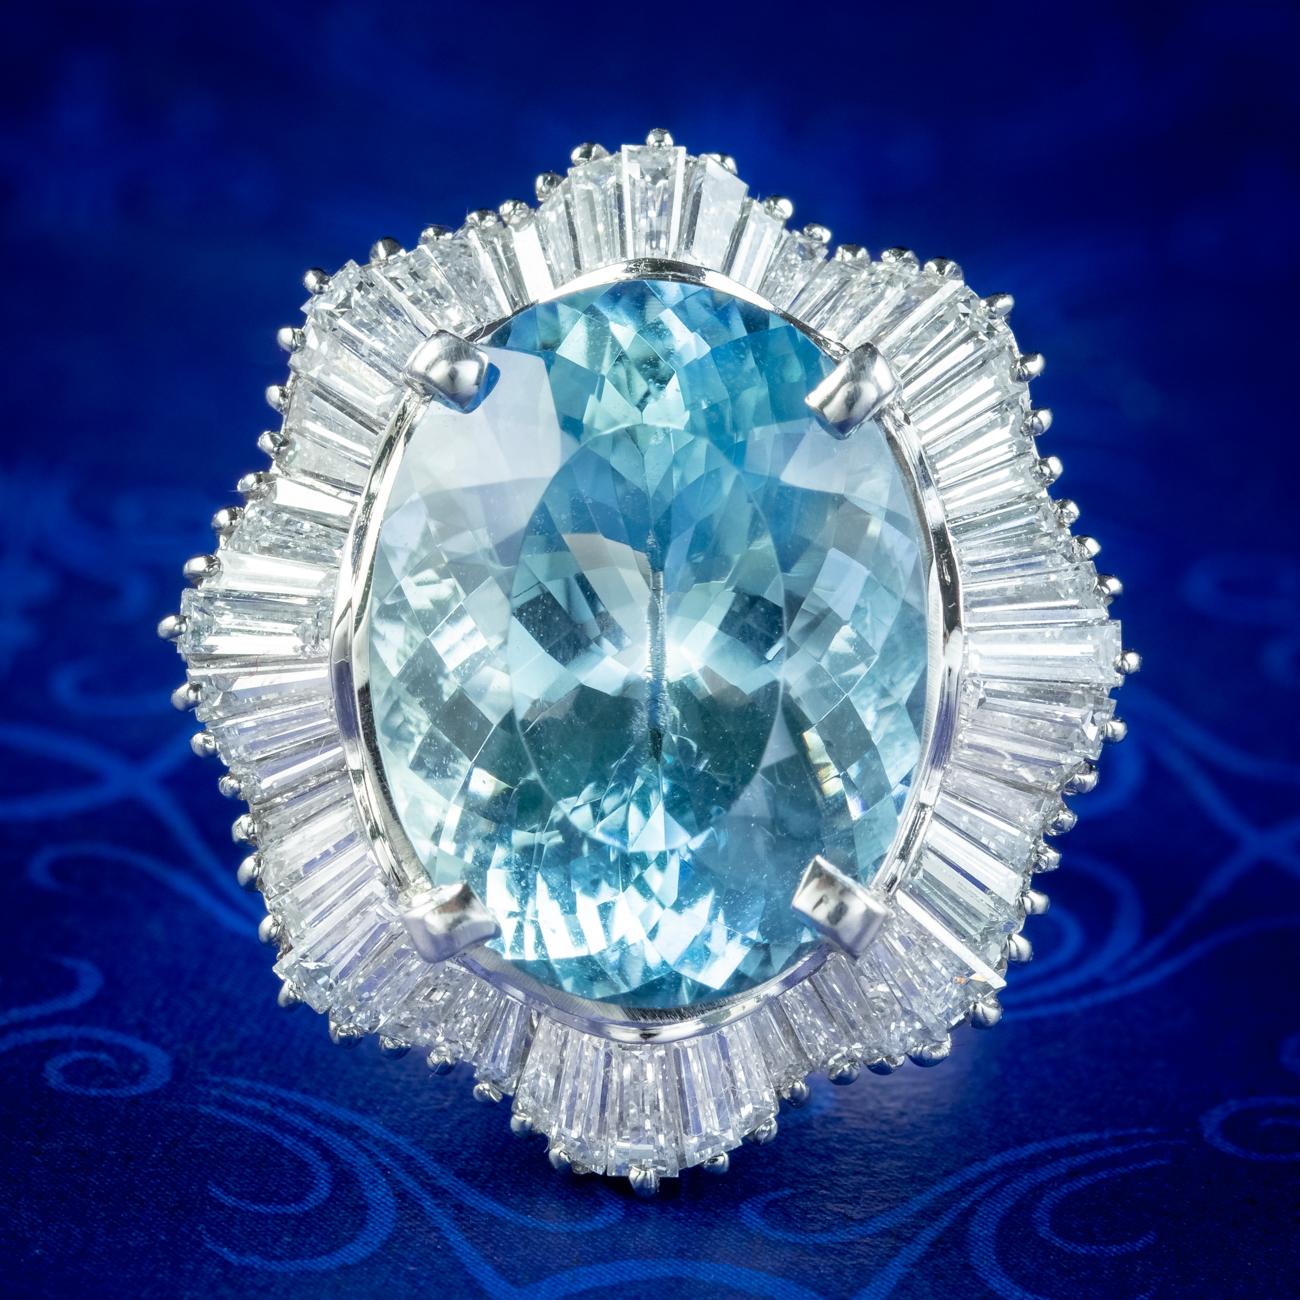 An outstanding aquamarine and diamond cocktail ring from the late 20th Century boasting a magnificent oval cut aquamarine in the centre with glistening facets that mimic light flickering on the surface of an icy blue pool. It’s accompanied by a